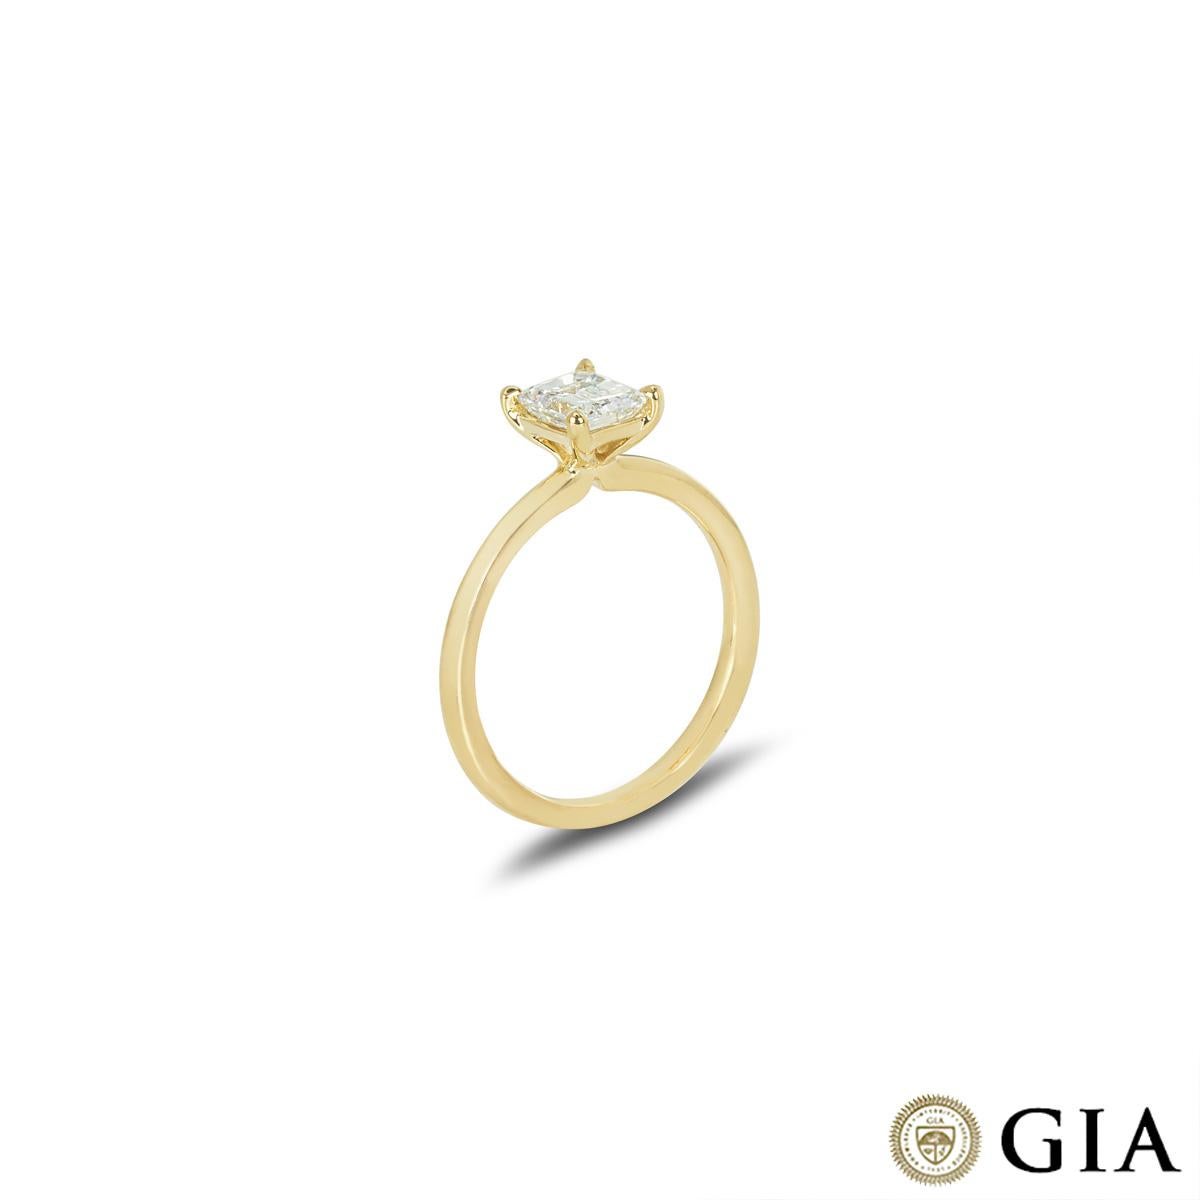 A captivating 18k yellow gold diamond engagement ring. The solitaire features an emerald cut diamond weighing 0.83ct, E colour and VS1 clarity. The diamond is set in a four prong mount on a classic 2mm band, has a gross weight of 3.16 grams and is